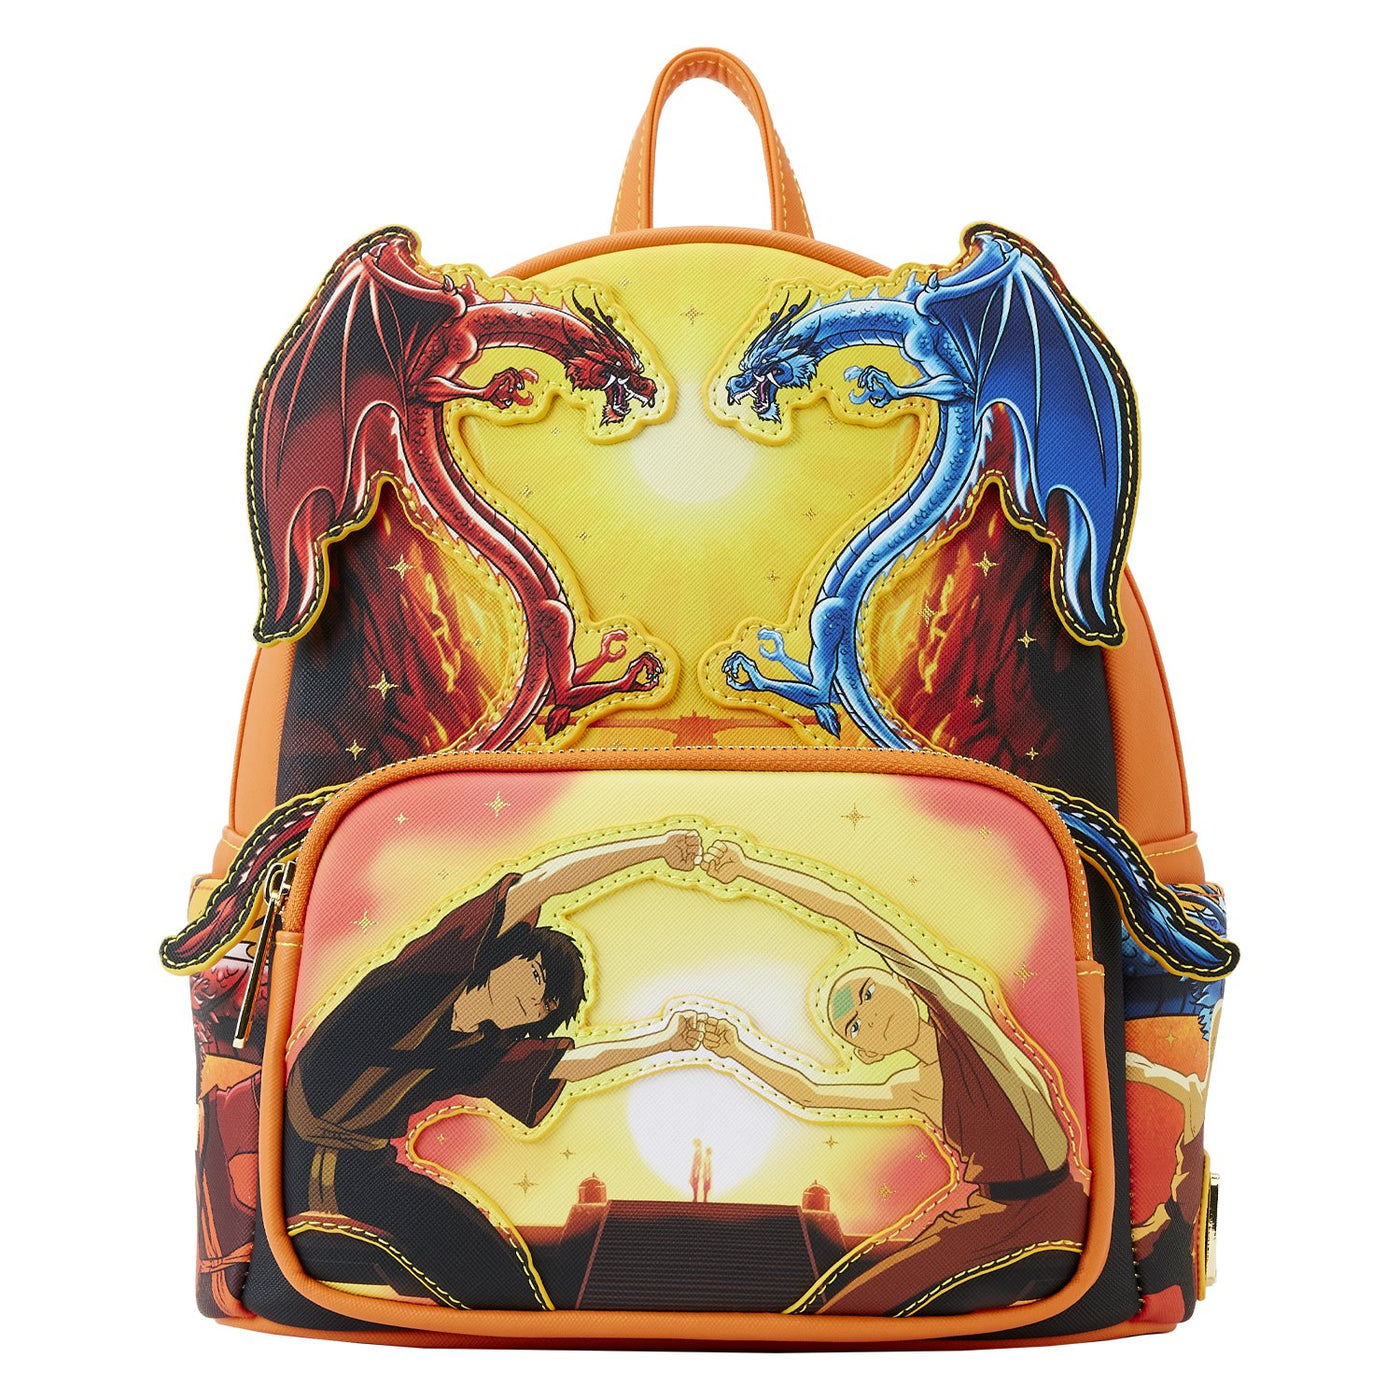 671803395190 - Loungefly Nickelodeon Avatar The Last Airbender The Fire Dance Mini Backpack - Front